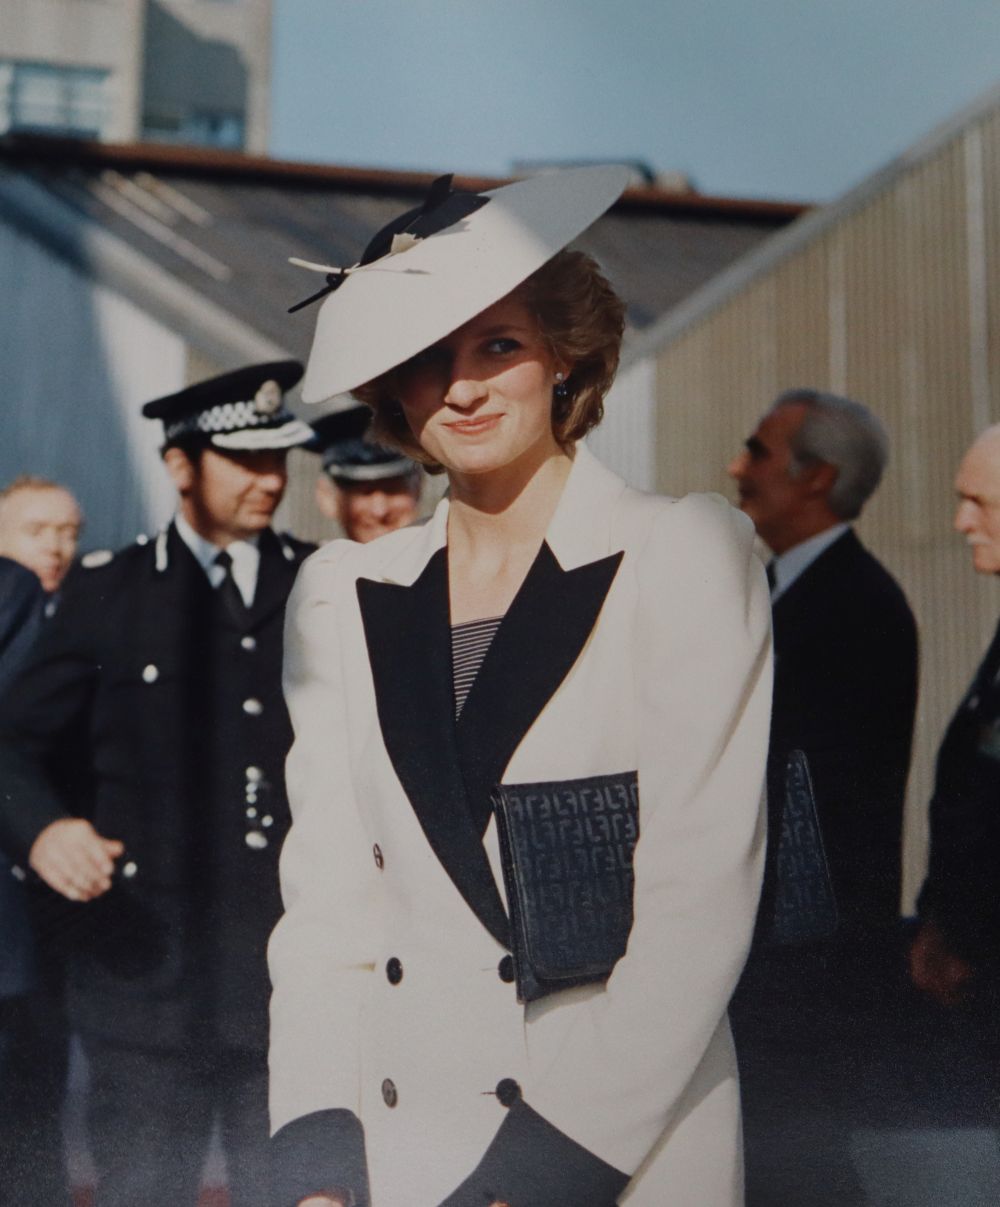 The Launch of HMS Cornwall by HRH Princess of Wales at Yarrow Shipbuilders Ltd, 14 October 1985 official visit photo album